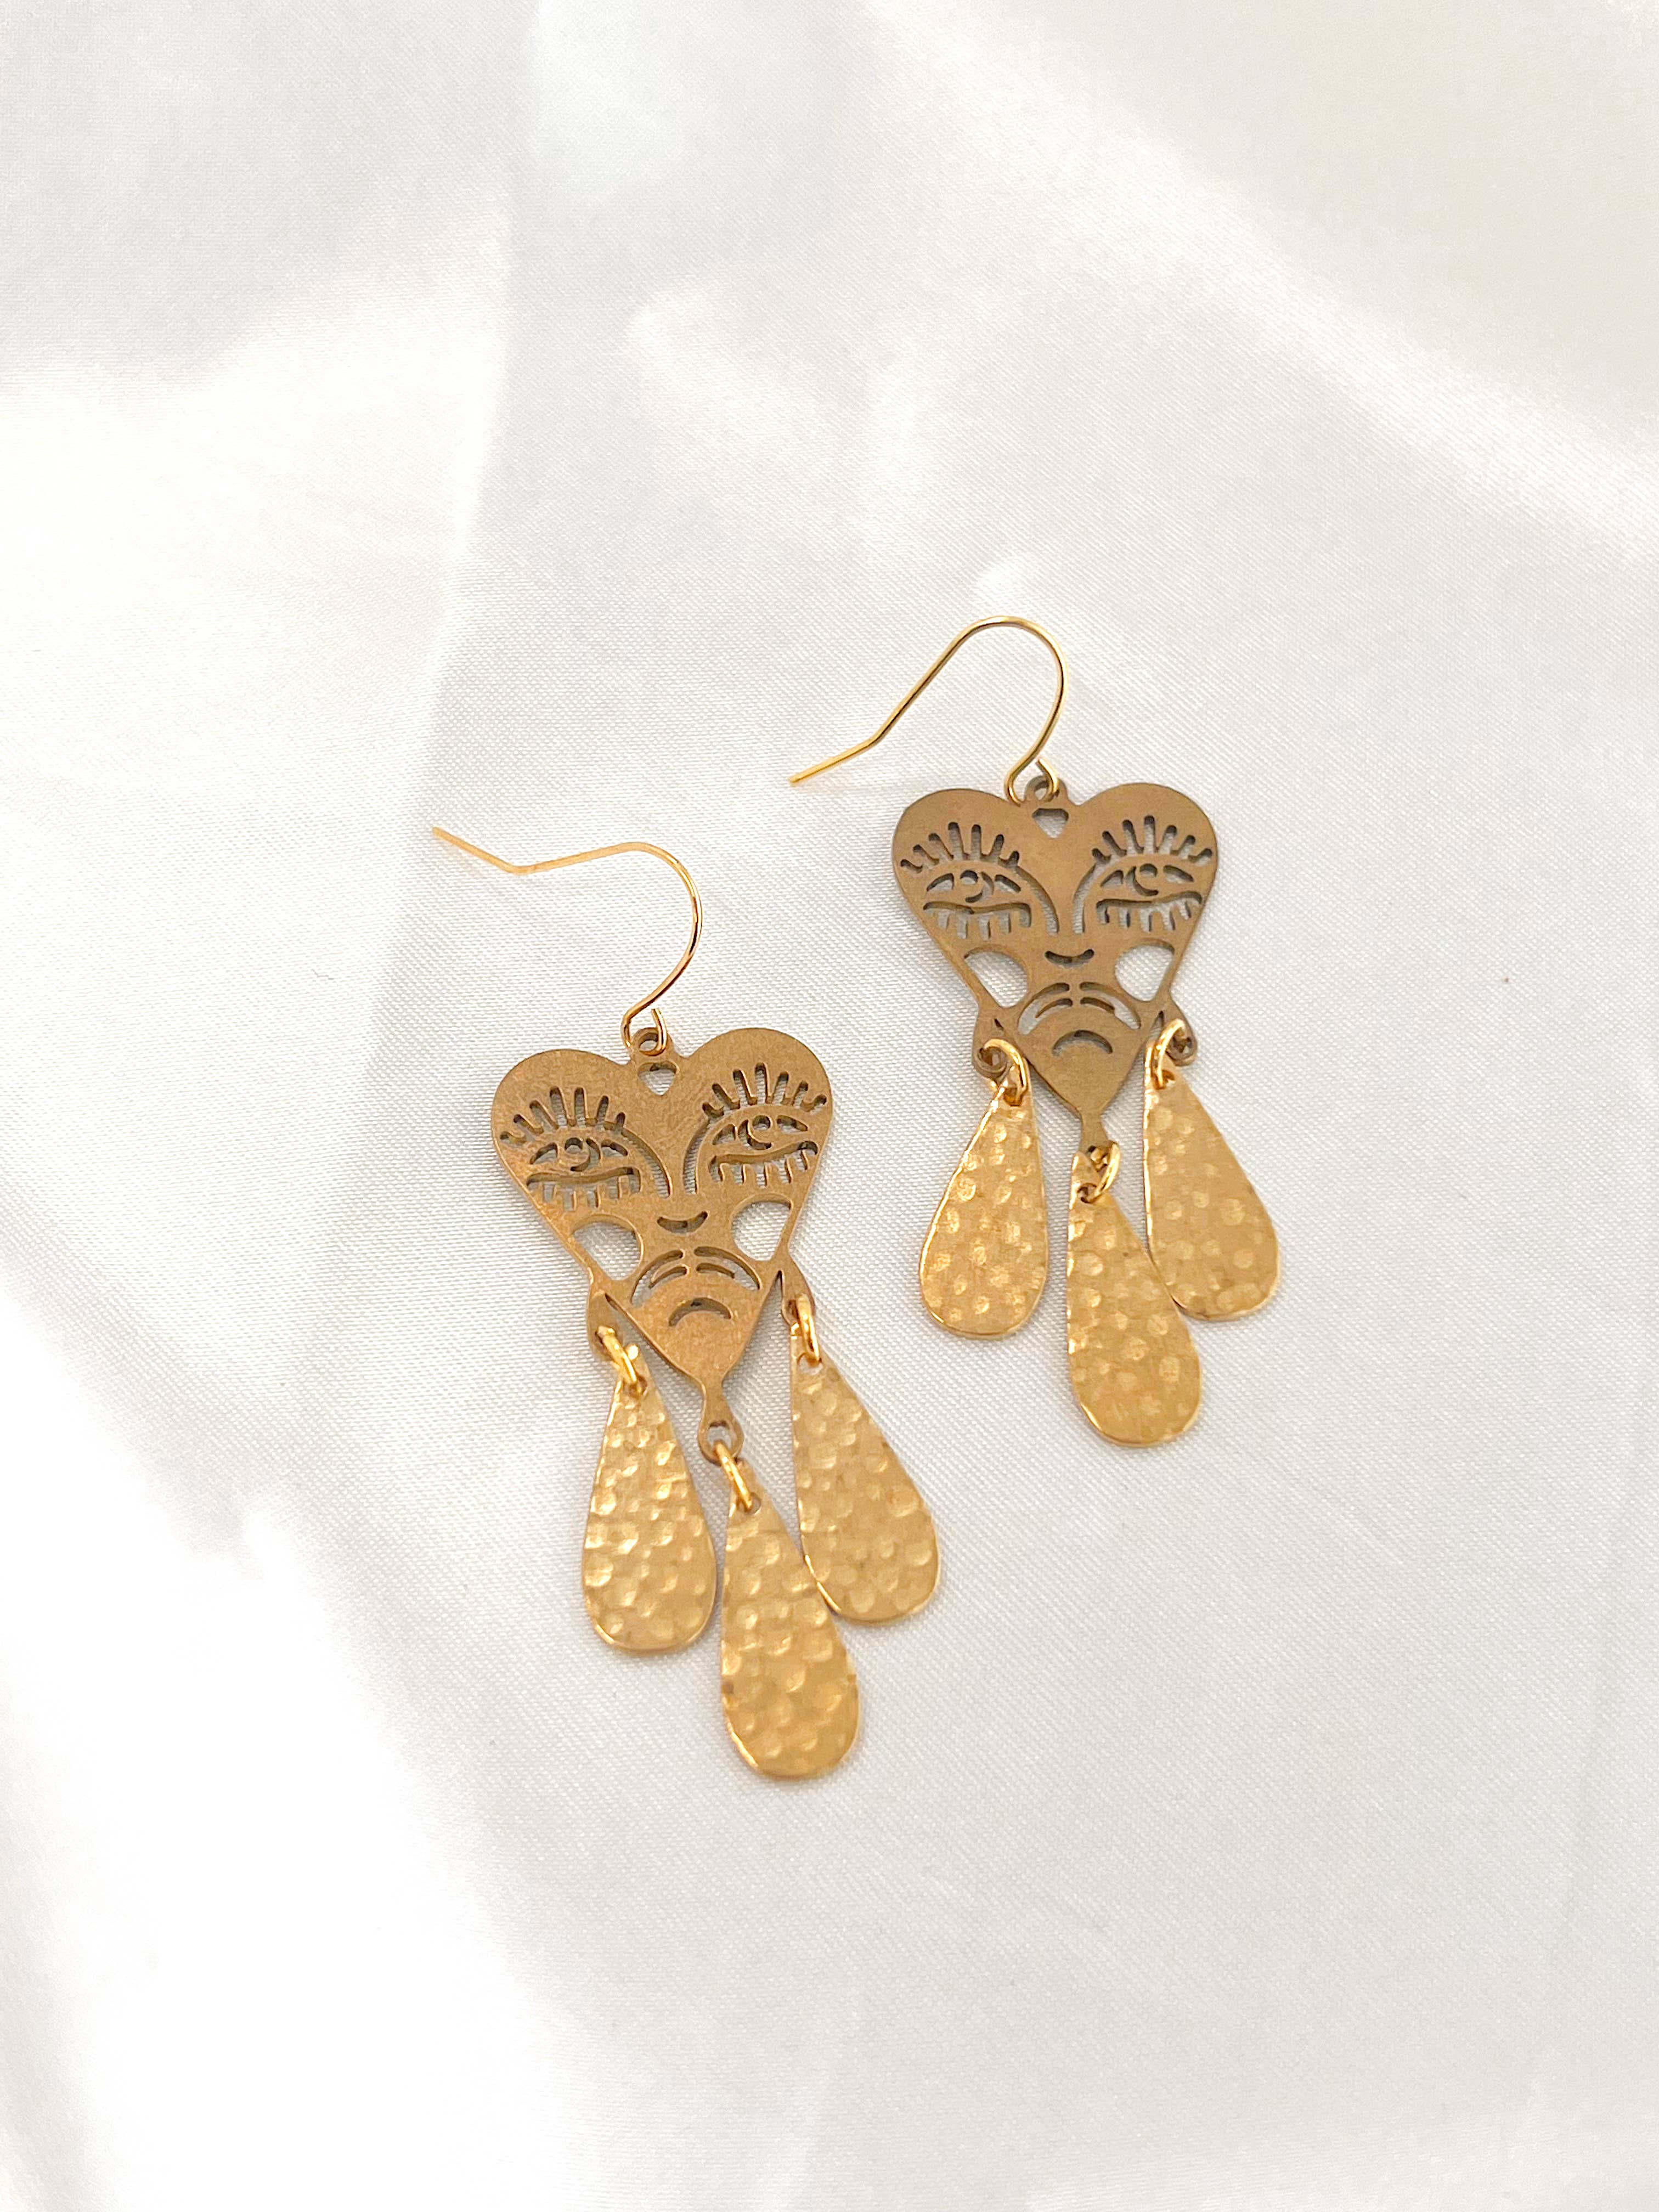 Golden Hour Designs - I’m Sensitive Gold American Traditional Earrings Valentine’s